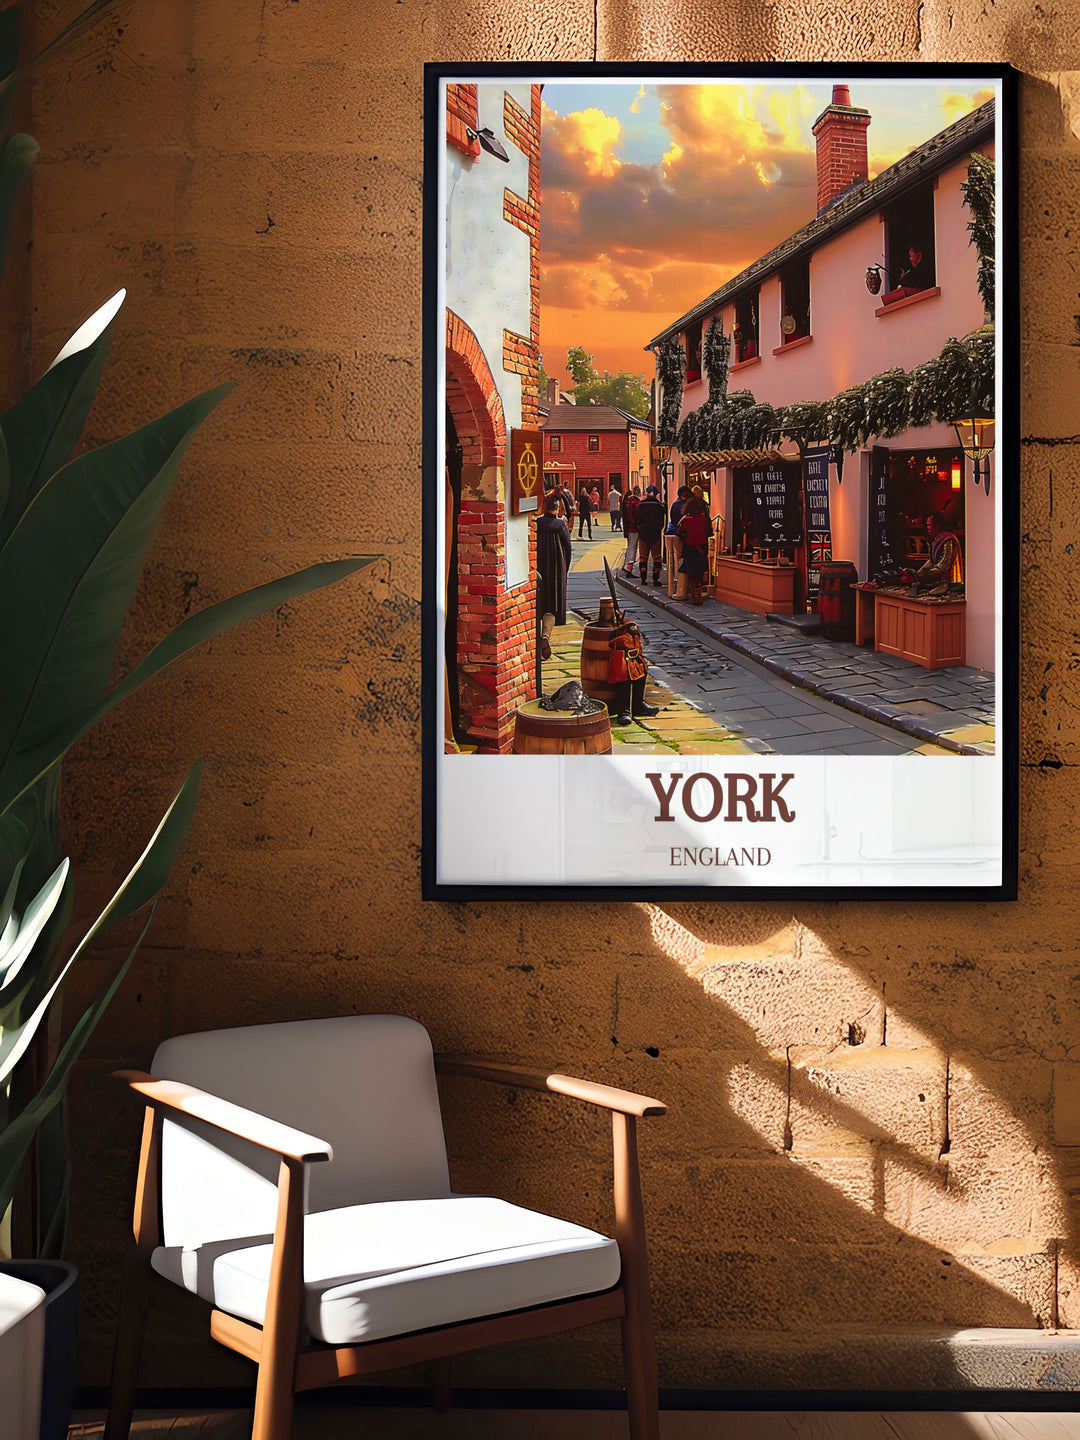 Yorkshire Wolds Art highlighting the scenic beauty of North Yorkshire. This art piece blends natural landscapes with historical ENGLAND, Jorvik Viking elements for a captivating addition to any room.